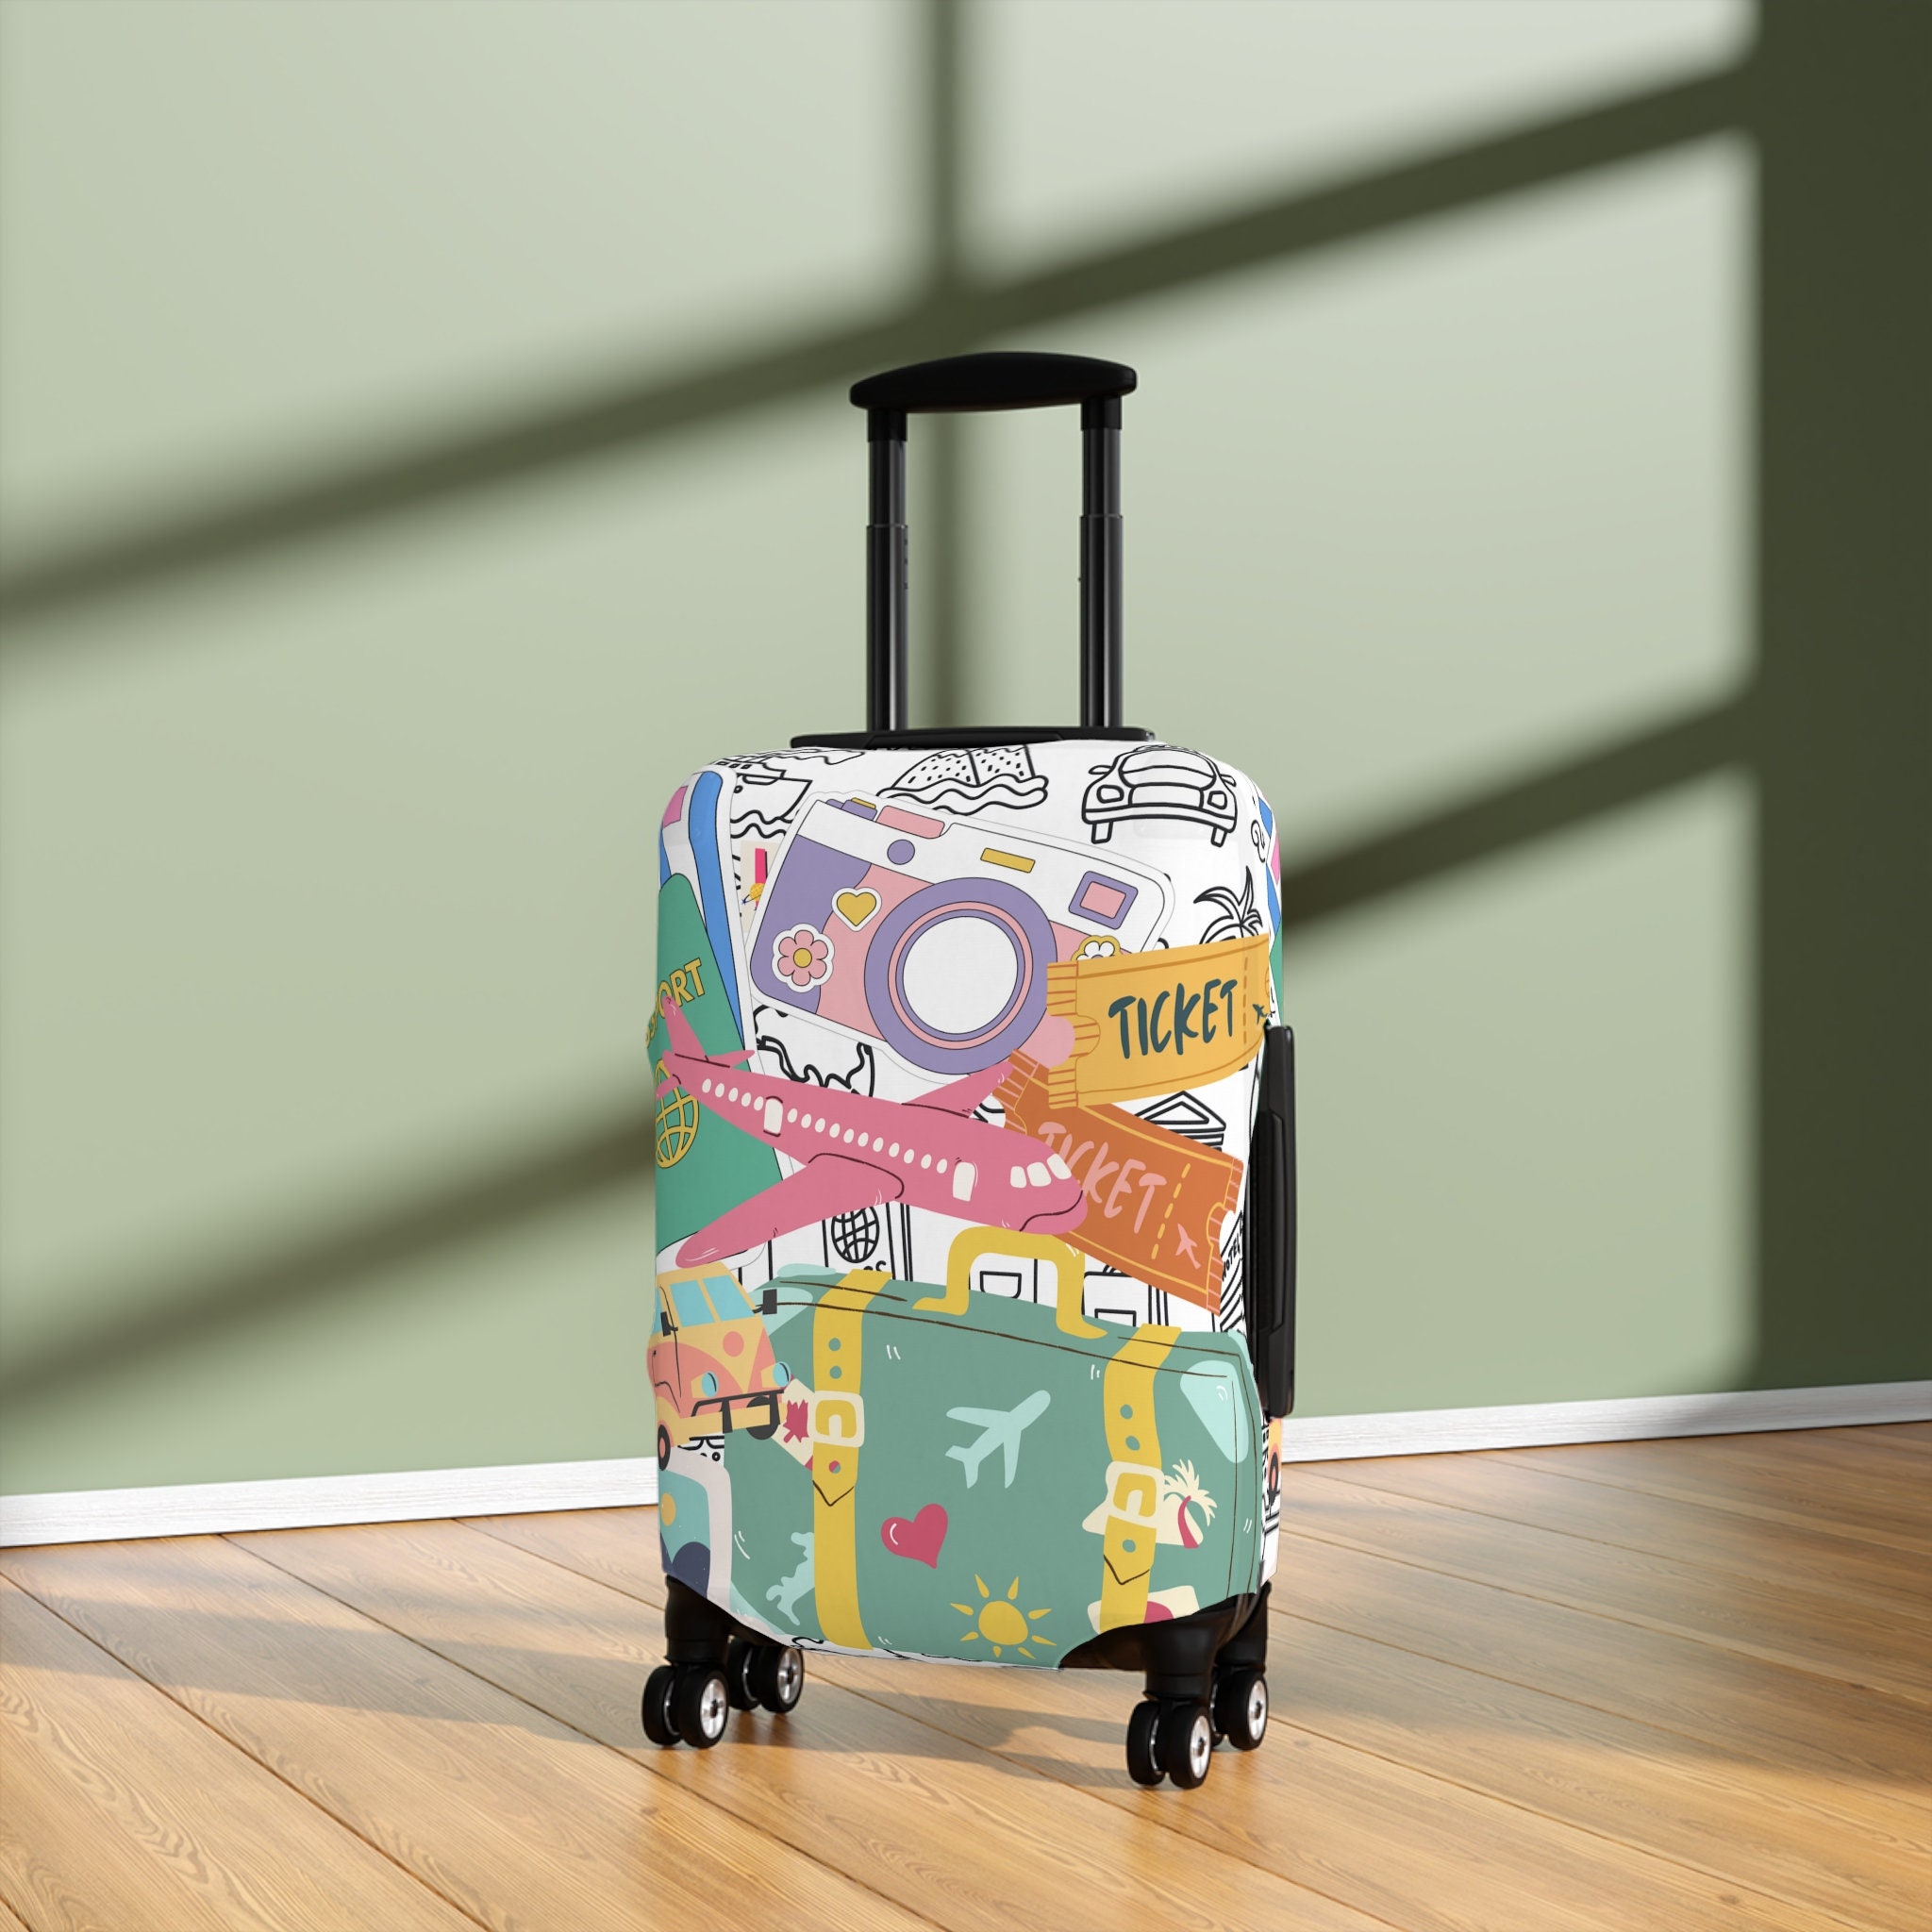 Travel Inspired Luggage Cover, Trip Vacation Gifts